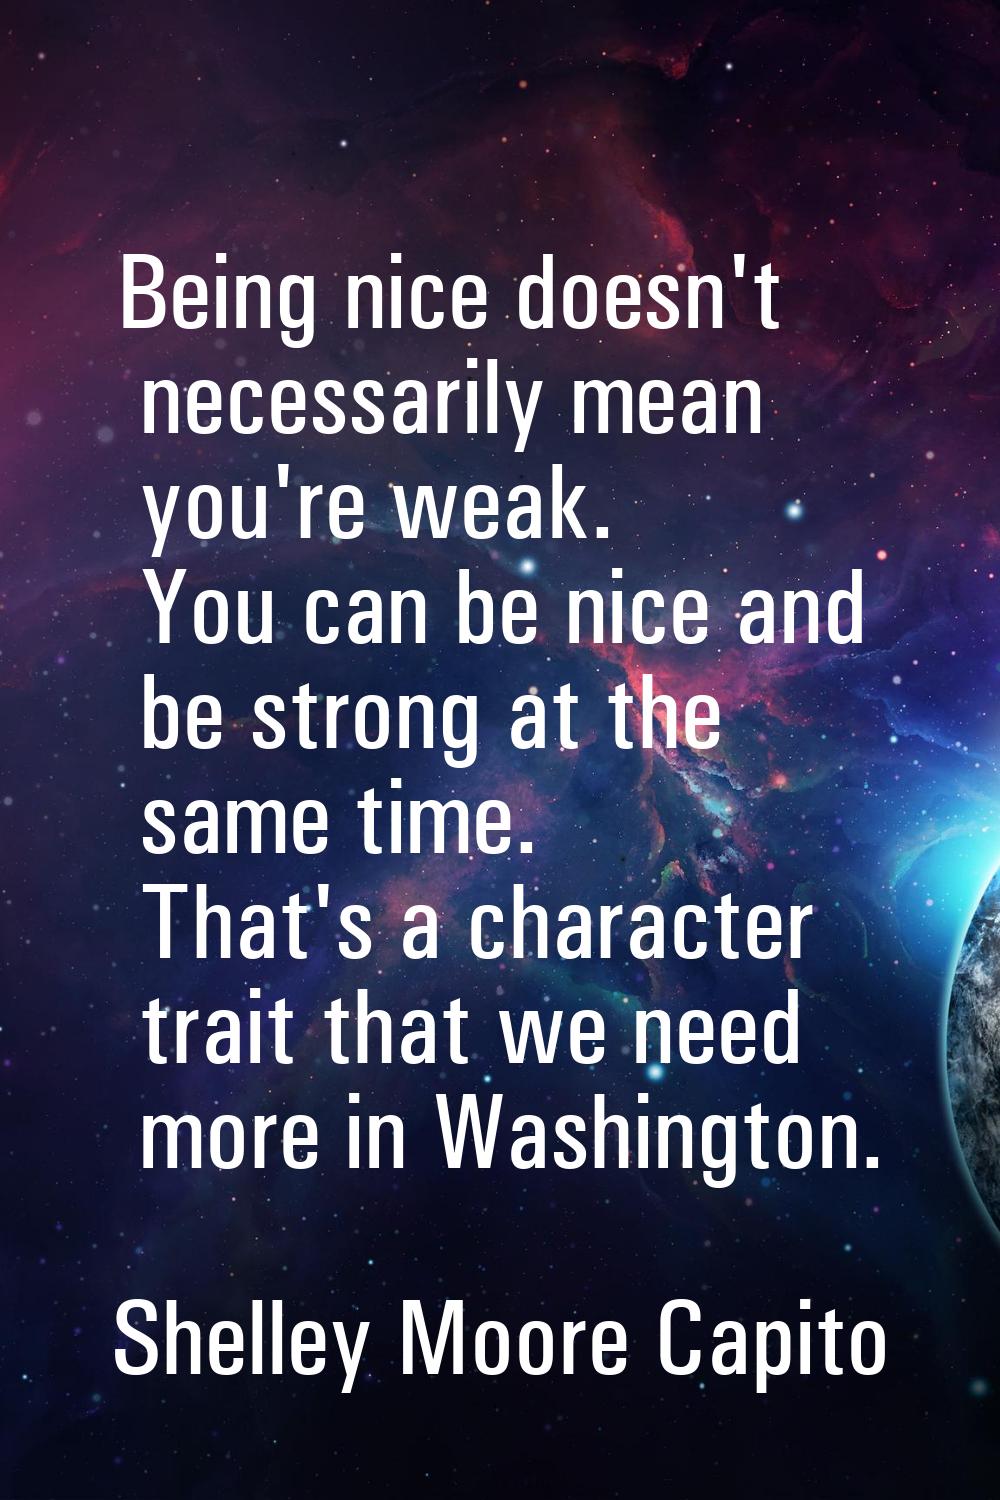 Being nice doesn't necessarily mean you're weak. You can be nice and be strong at the same time. Th